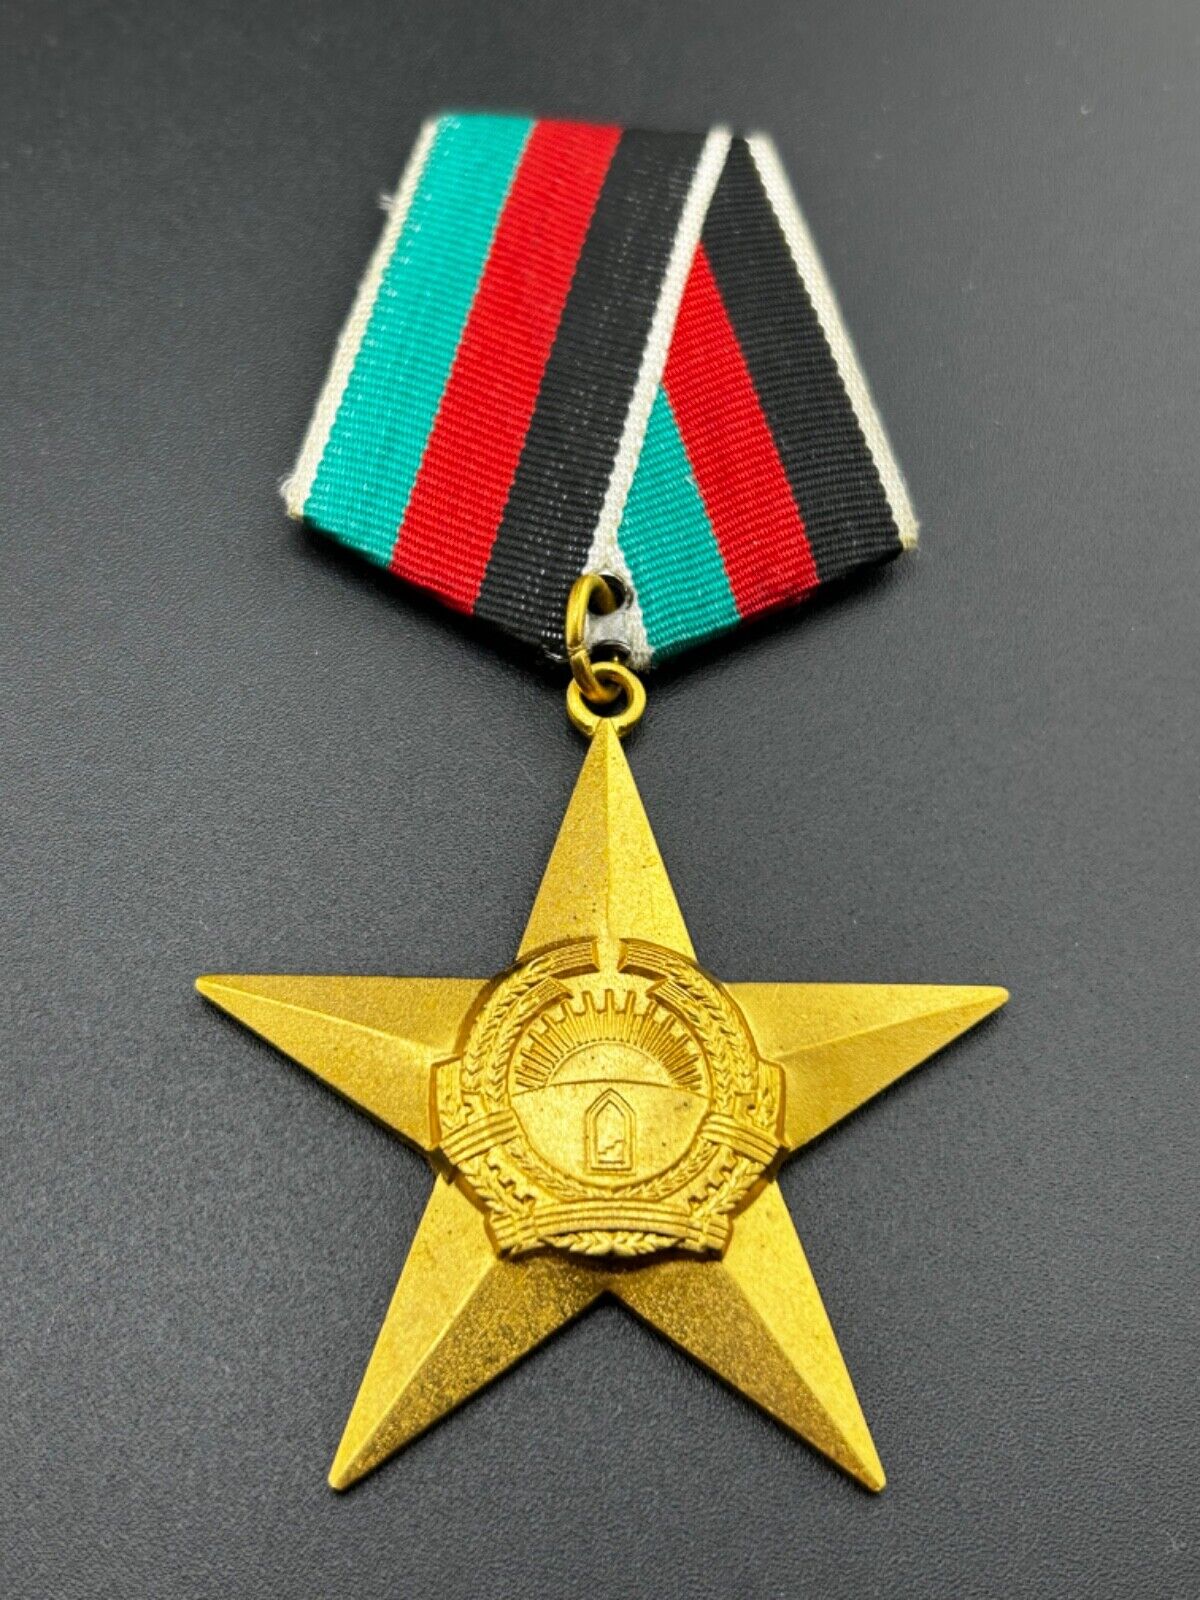 AFGHANISTAN ORDER OF THE STAR 1st Class Type 2 Russian Communist MEDAL - RARE